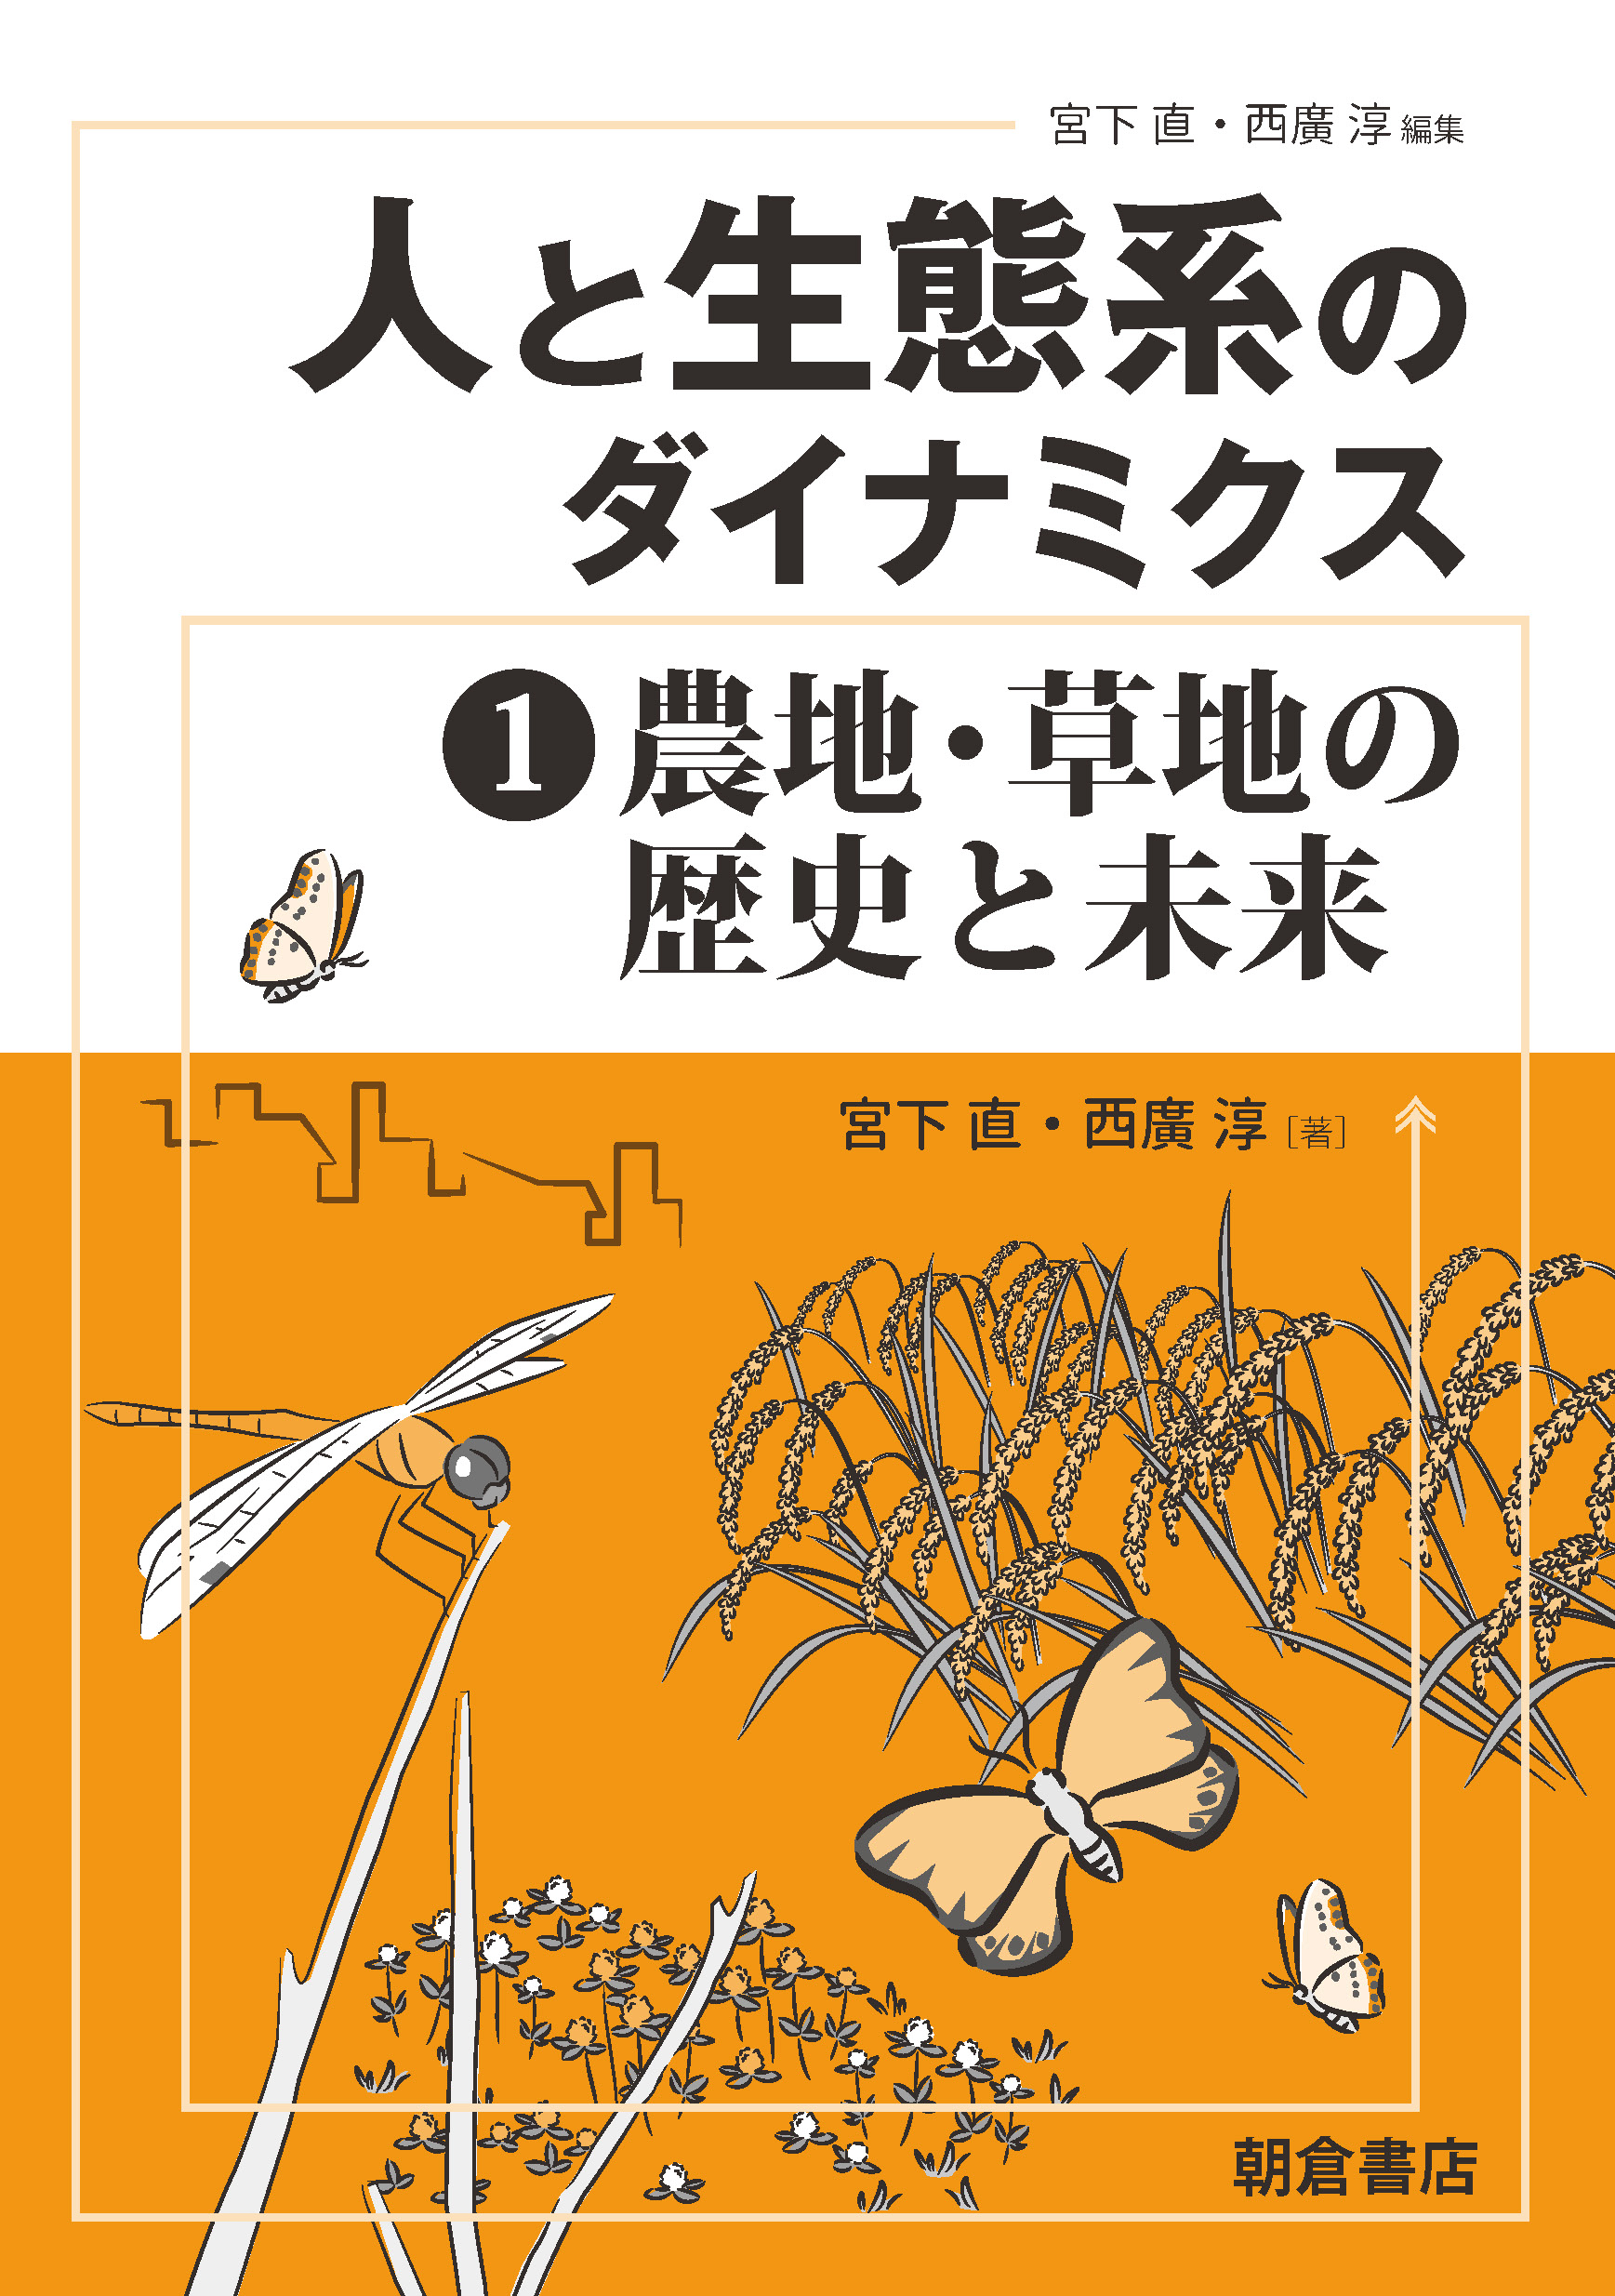 Illustrations of farm and bugs on an orange cover